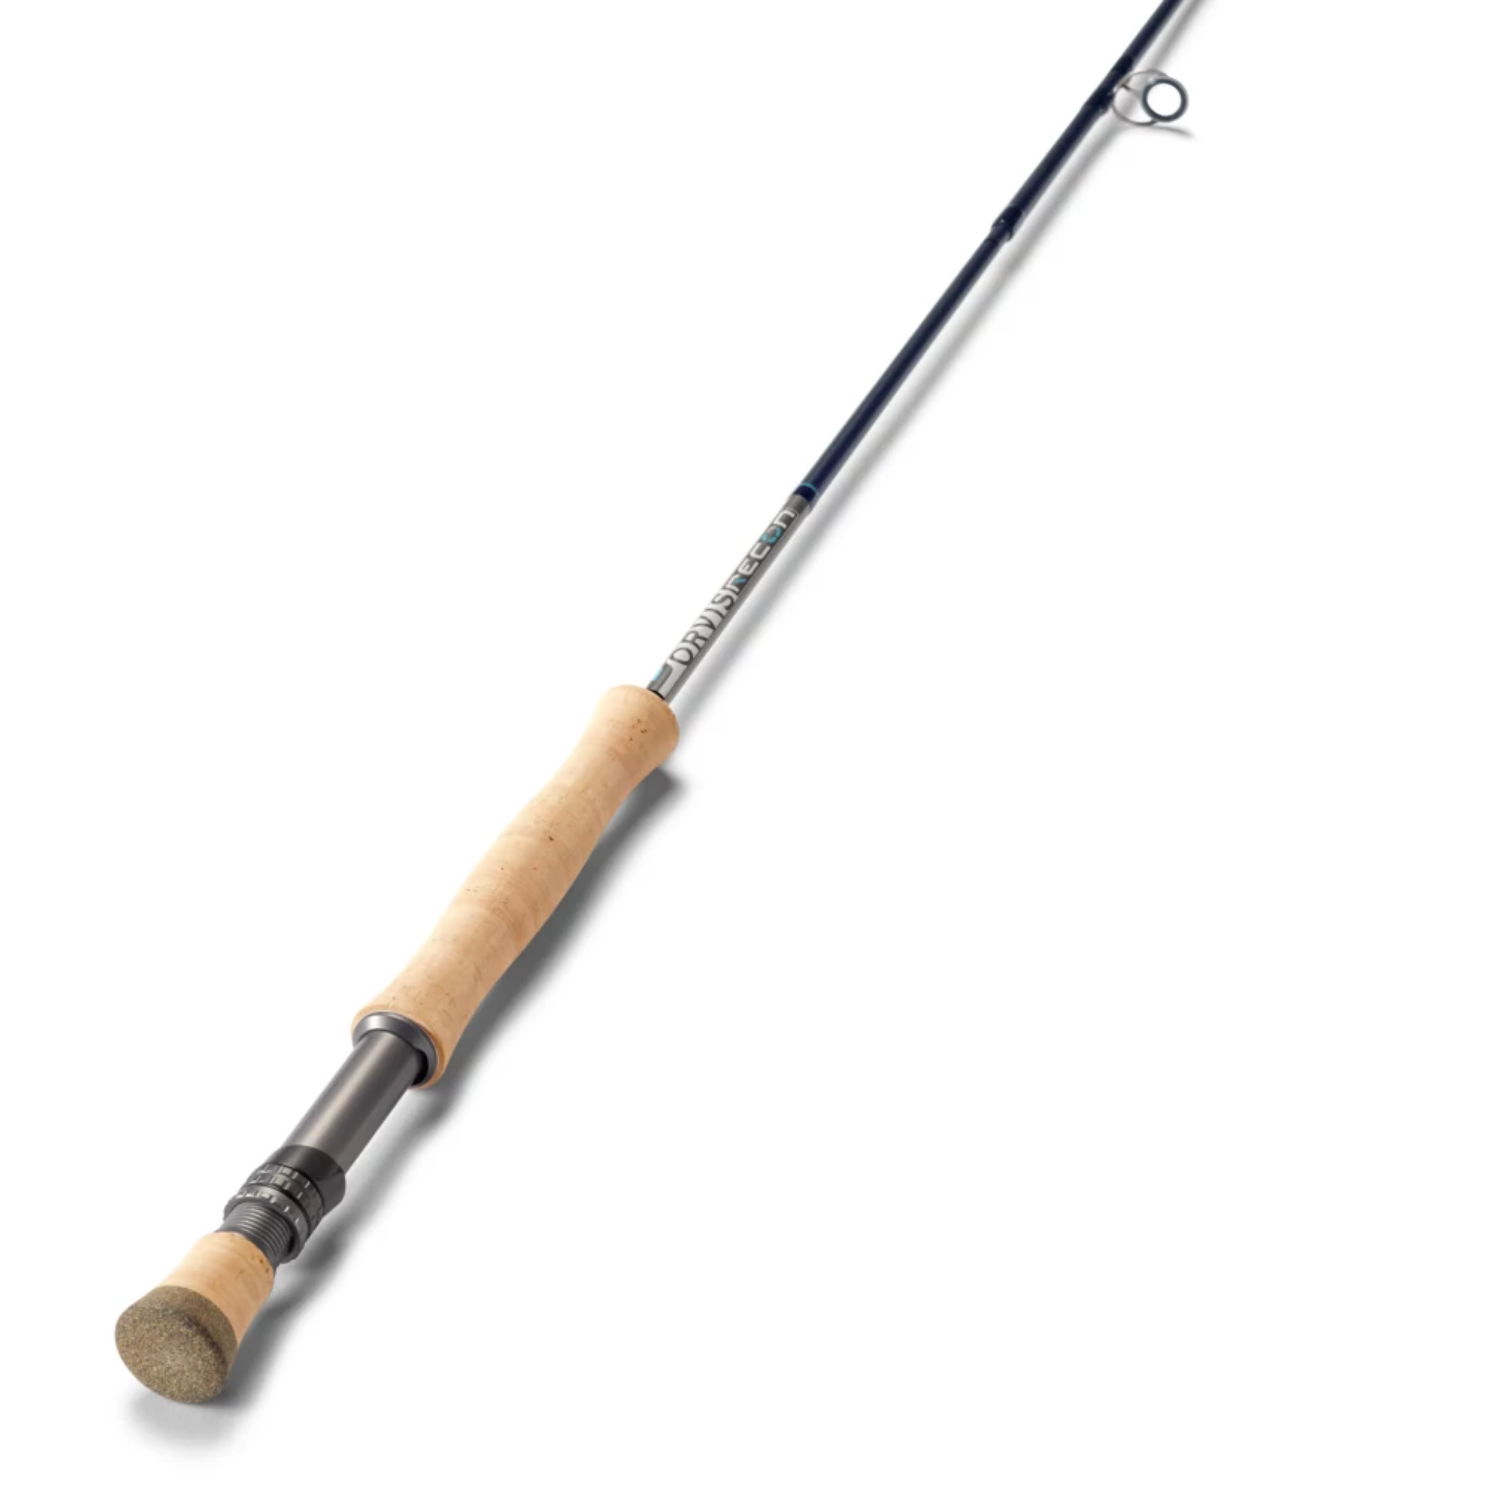 Orvis RECON Saltwater Fly Rod & Reel Outfits